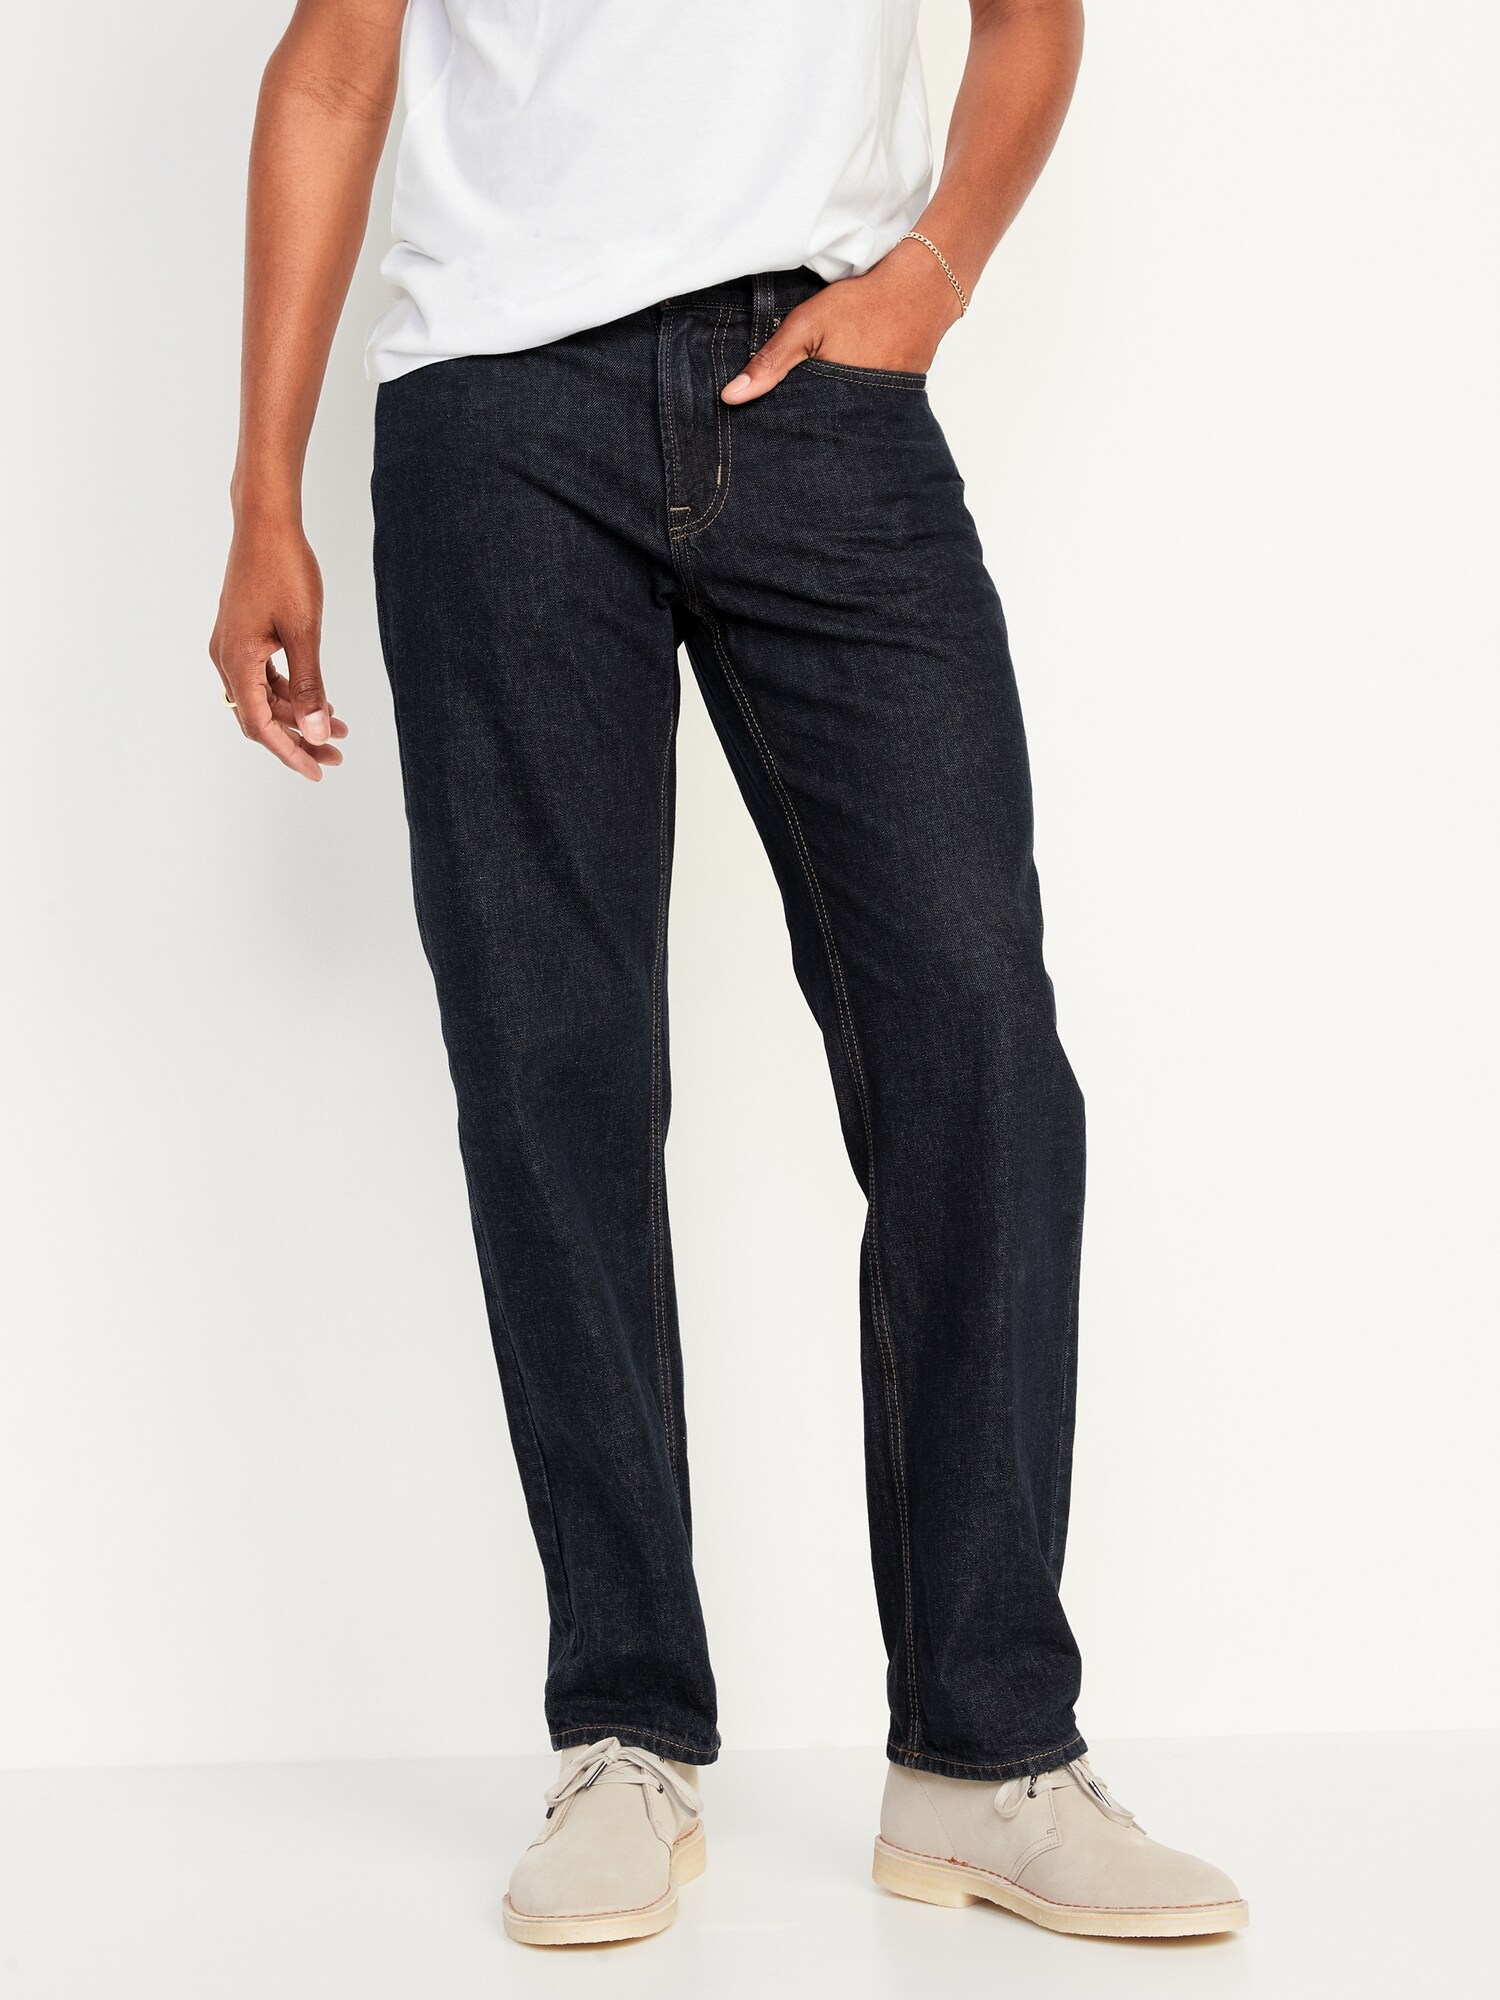 Old Navy Loose Non-Stretch Jeans for Men